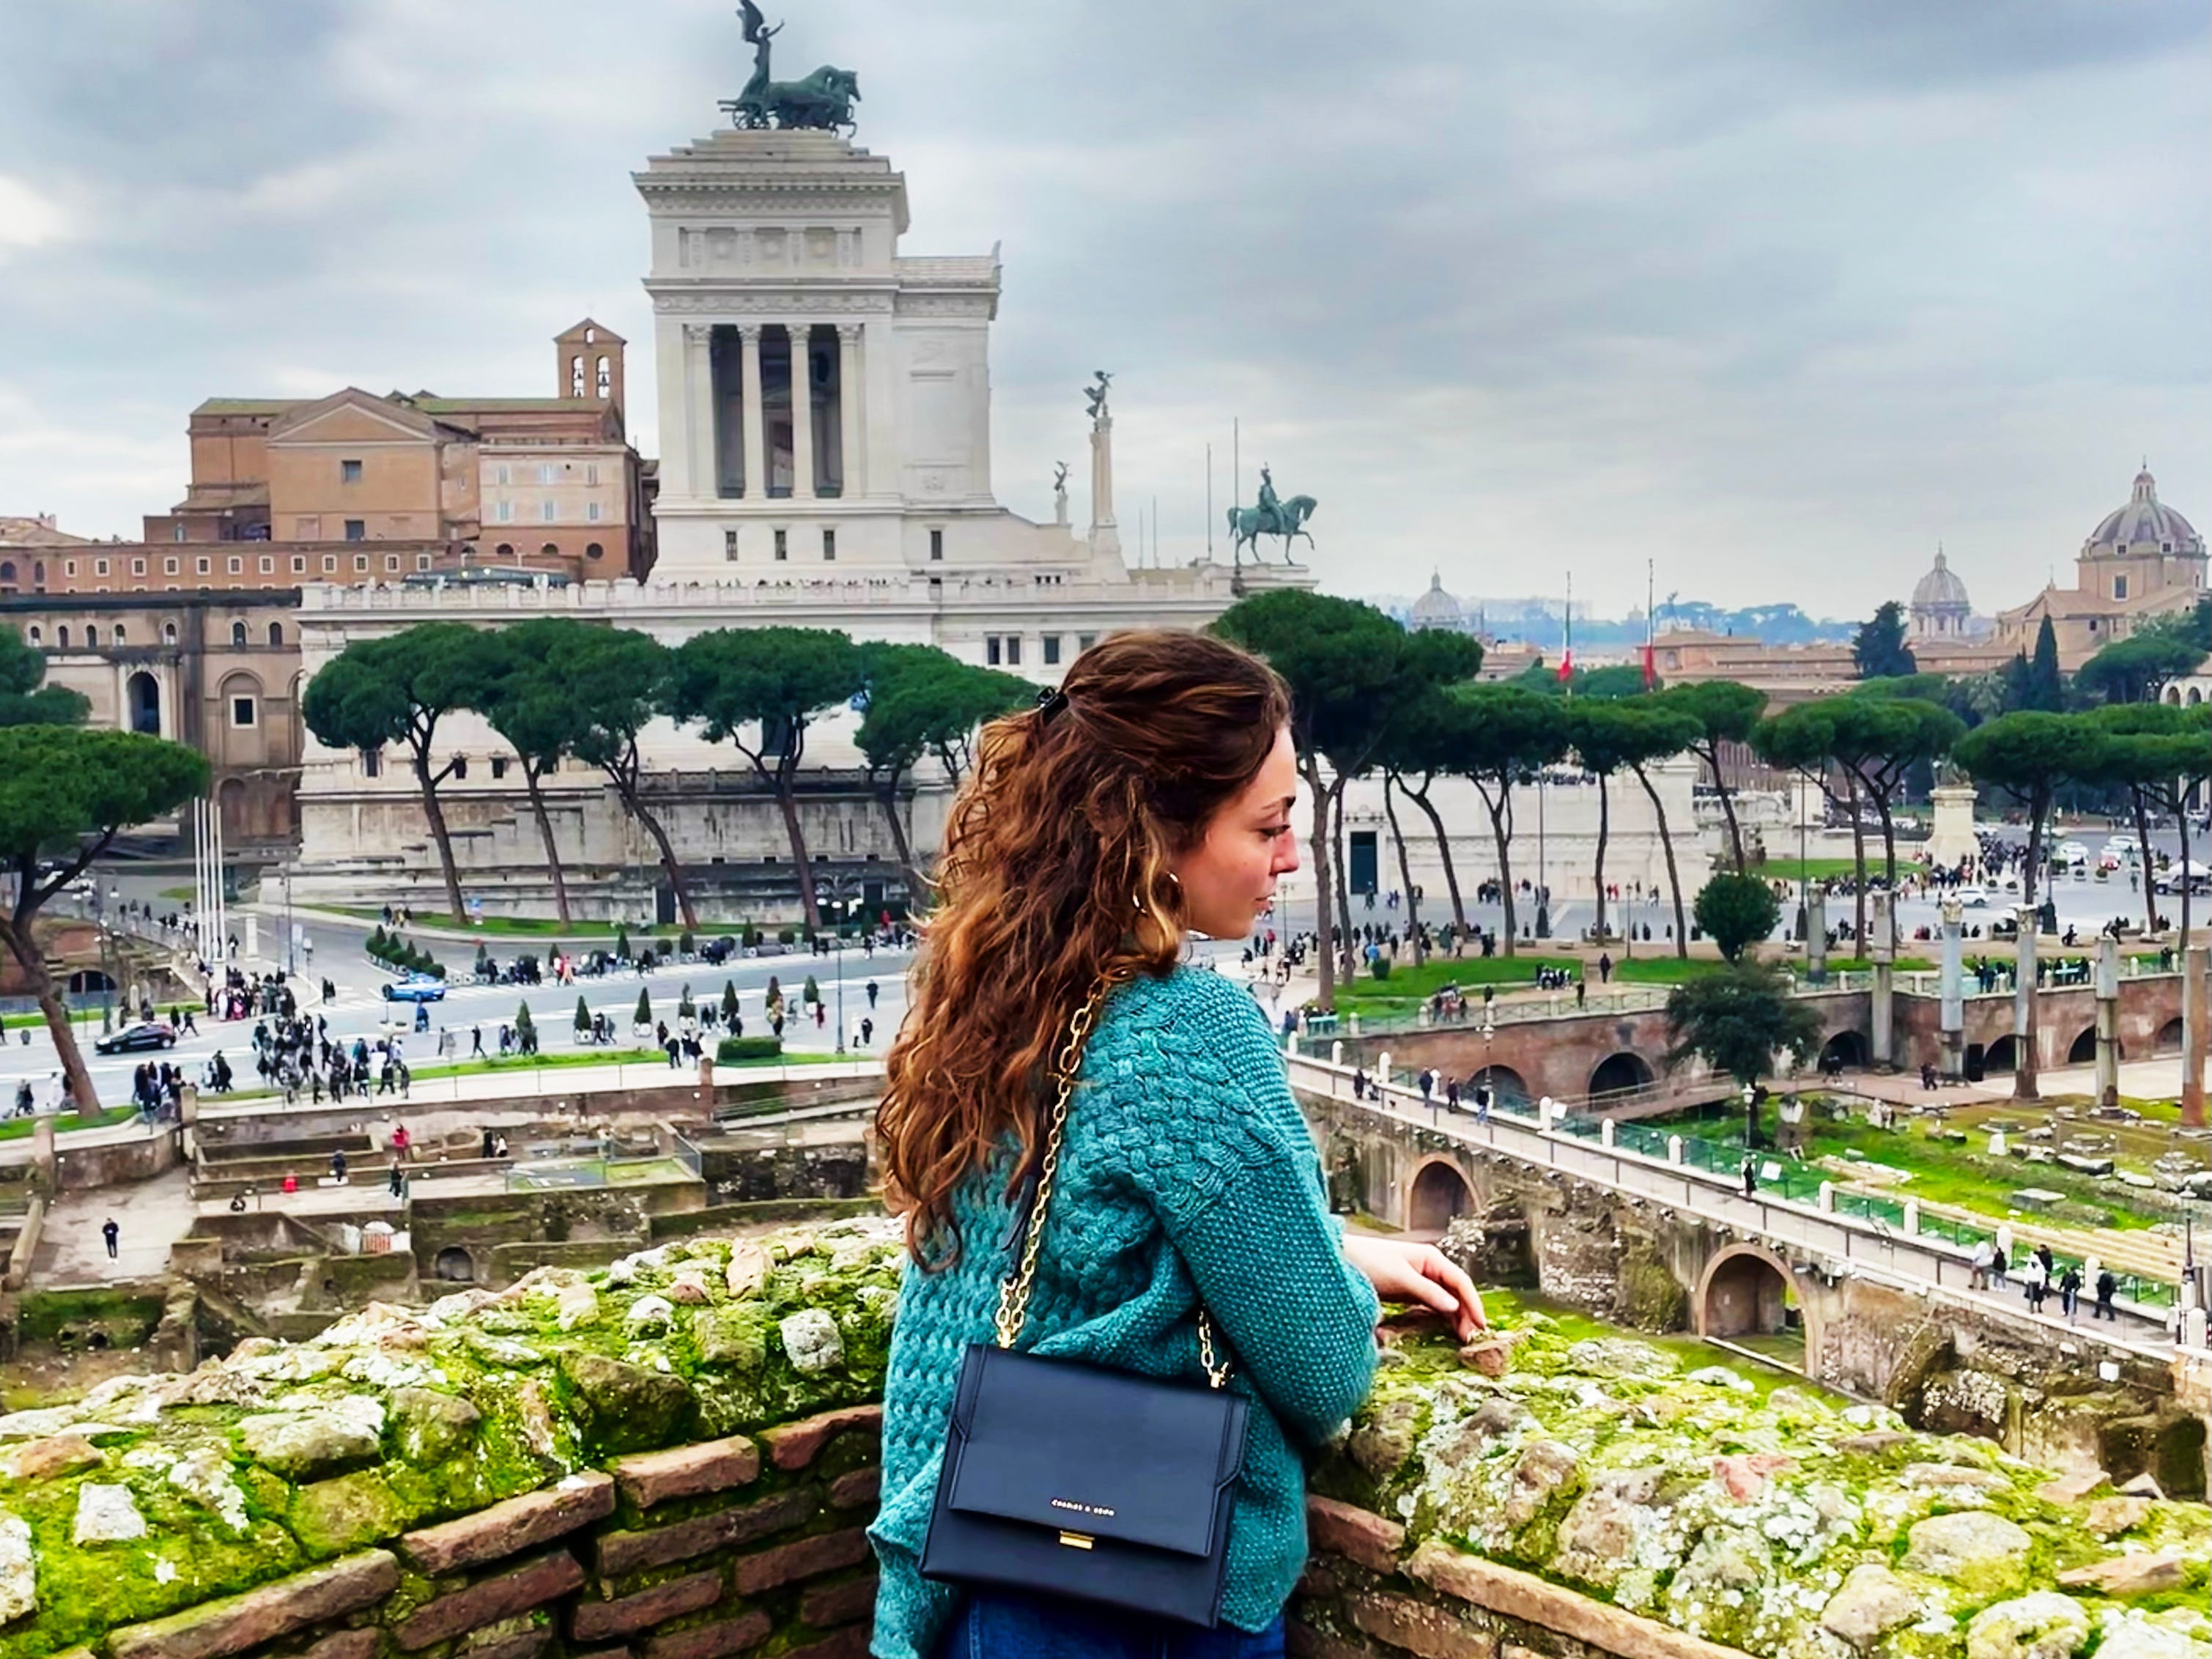 <ul class="summary-list"><li>I'm from Rome, Italy, and always see tourists visiting the same crowded sites.</li><li><a href="https://www.businessinsider.com/colosseum-rome-italy-visit-tour-reality-vs-expectation-photos-2023-2">The Colosseum</a> and Vatican are must-sees for first-time visitors, but the city has more to offer.</li><li>Check out the impressive Stadium of Domitian, Largo di Torre Argentina, or Castel Sant'Angelo.</li></ul><p><a href="https://www.businessinsider.com/mistakes-tourists-make-in-rome-italy-local-tips-2023-2">Growing up in Rome</a>, I've become accustomed to skirting the hundreds-thick crowds that form outside iconic monuments like the Colosseum and the Vatican Museums — the Eternal City is, after all, one of the <a href="https://www.statista.com/statistics/1304598/top-cities-among-travelers-europe/">most popular cities to visit in the world</a>.</p><p>Although I believe both monuments are <a href="https://www.businessinsider.com/las-vegas-first-visit-things-to-do-from-frequent-traveler-2023">must-sees for first-time visitors</a>, the Italian city is home to many other sites that are just as historic and awe-inspiring.</p><p>Plus, with <a href="https://www.reuters.com/world/europe/tourist-numbers-italy-hit-record-2023-foreigners-majority-2024-06-04/">Italy's tourism numbers already hitting record levels</a> last year, avoiding crowds will likely be as important as ever this summer.</p><p>On your next <a href="https://www.businessinsider.com/everything-you-need-to-know-about-traveling-to-rome-italy">trip to Rome</a>, forgo the Colosseum and the Vatican Museums and check out these underrated, less crowded monuments instead.</p><div class="read-original">Read the original article on <a href="https://www.businessinsider.com/best-things-to-visit-in-rome-from-local-avoid-crowds-2024-6">Business Insider</a></div>